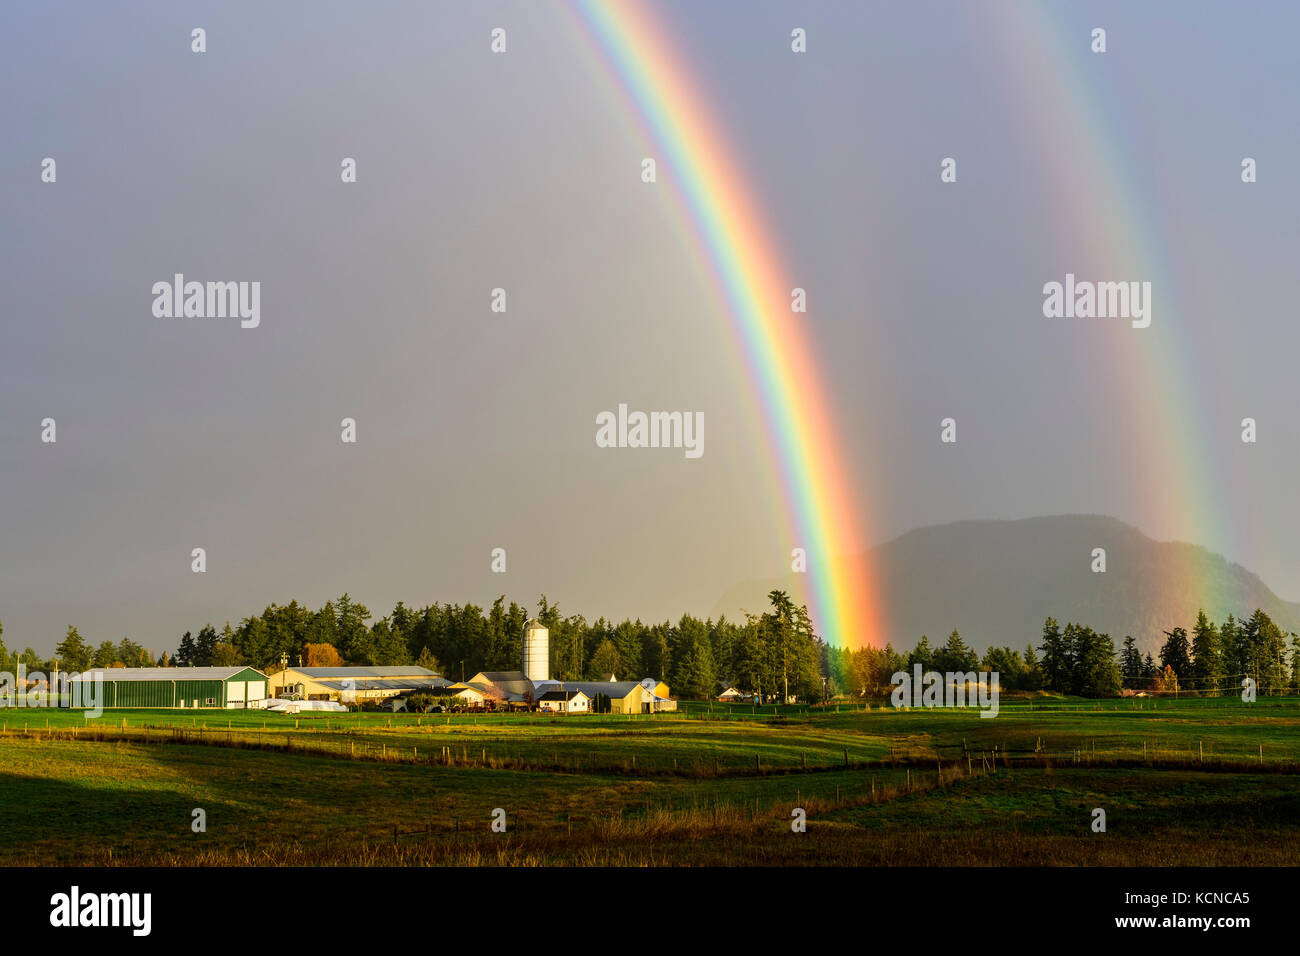 A double rainbow over a farm in Cowichan Bay, British Columbia. Stock Photo